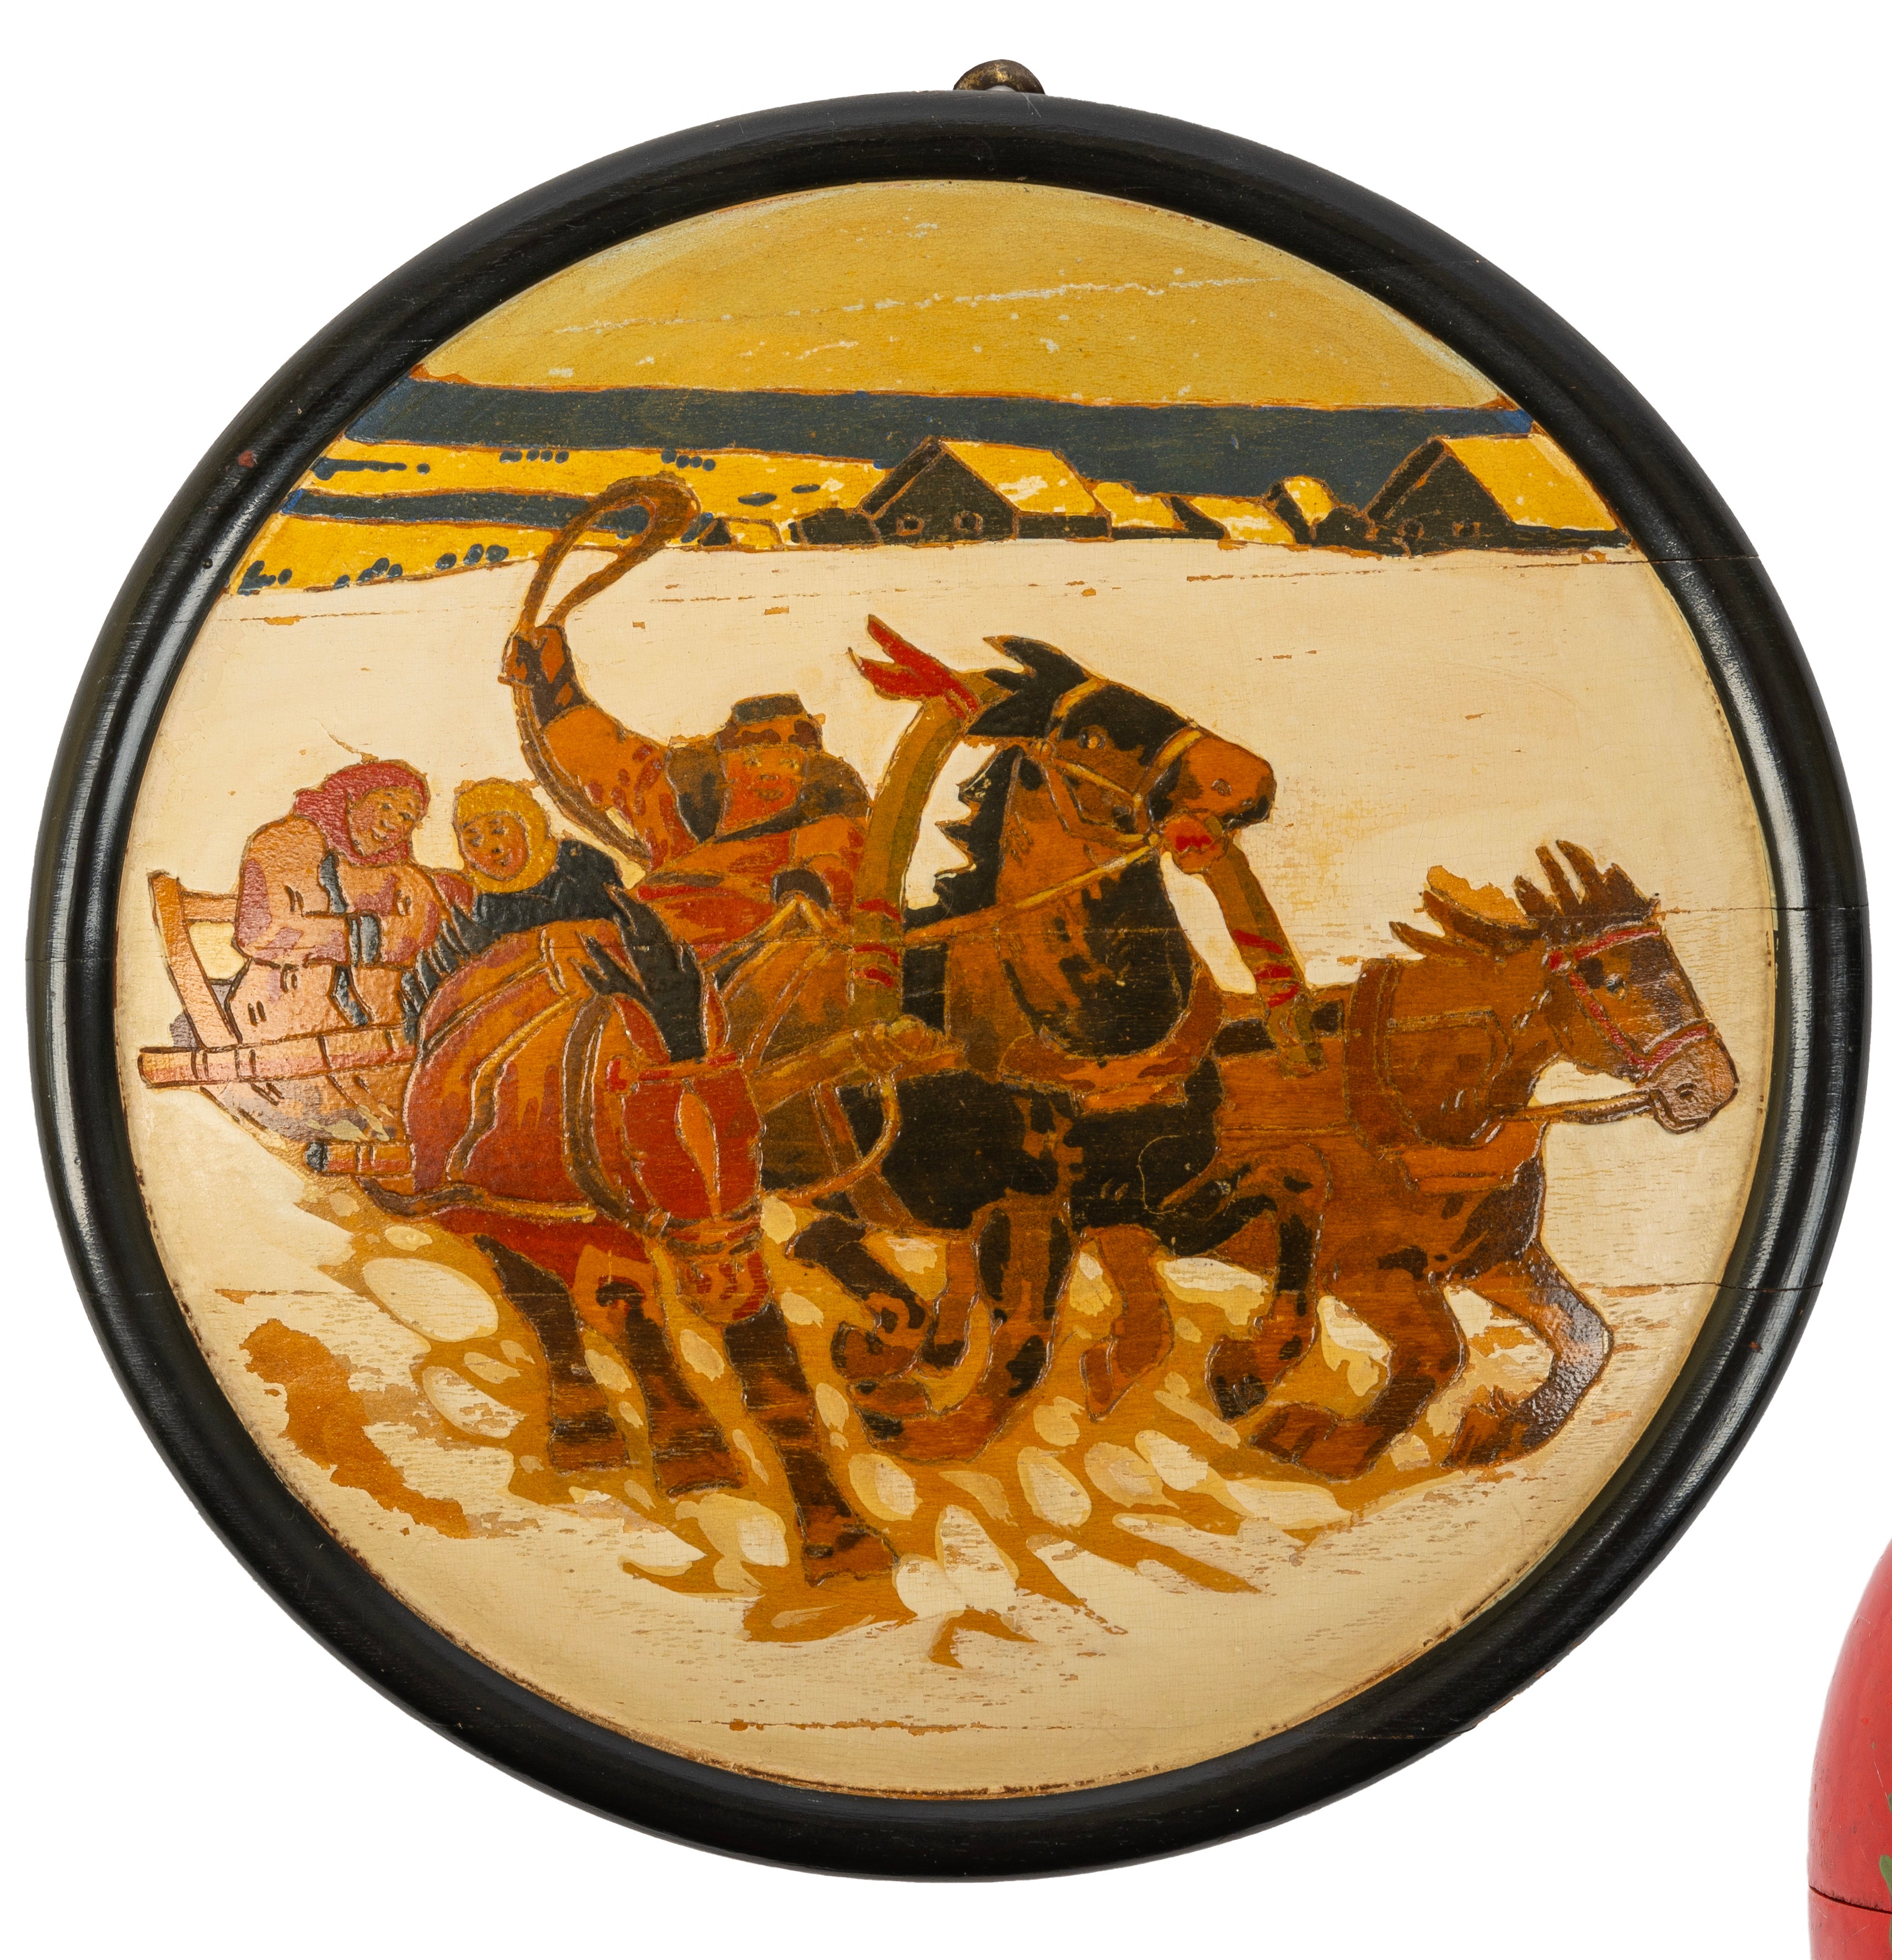 Depicting a troika pulling a traditional Russian sleigh though a winter landscape, the three panting horses whipped along by a red-bearded driver wearing a shapka, while two women wrapped in scarves huddle in conversation in the rear. Snow laden